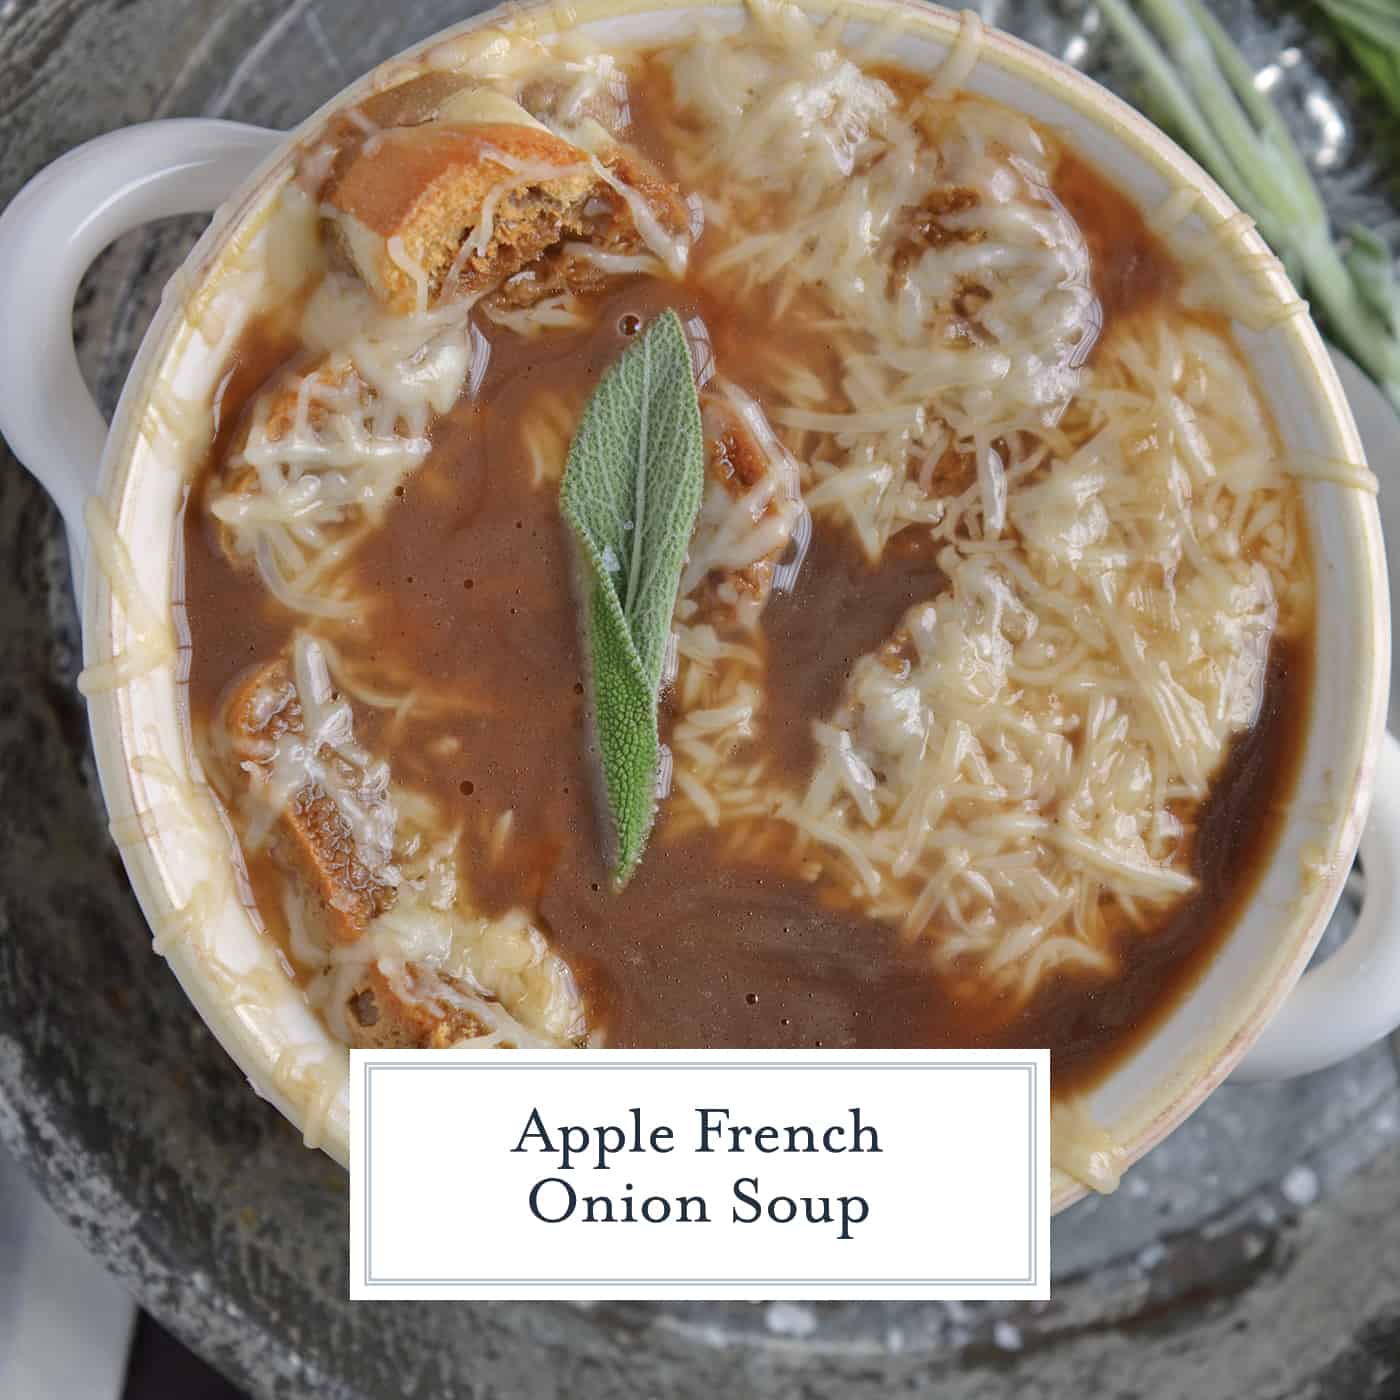 Apple French Onion Soup combines a robust French Onion Soup Recipe using sweet apples for flavor and texture. Top with crunchy garlic croutons and gooey cheese. #frenchonionsoup #fallsoup www.savoryexperiments.com 